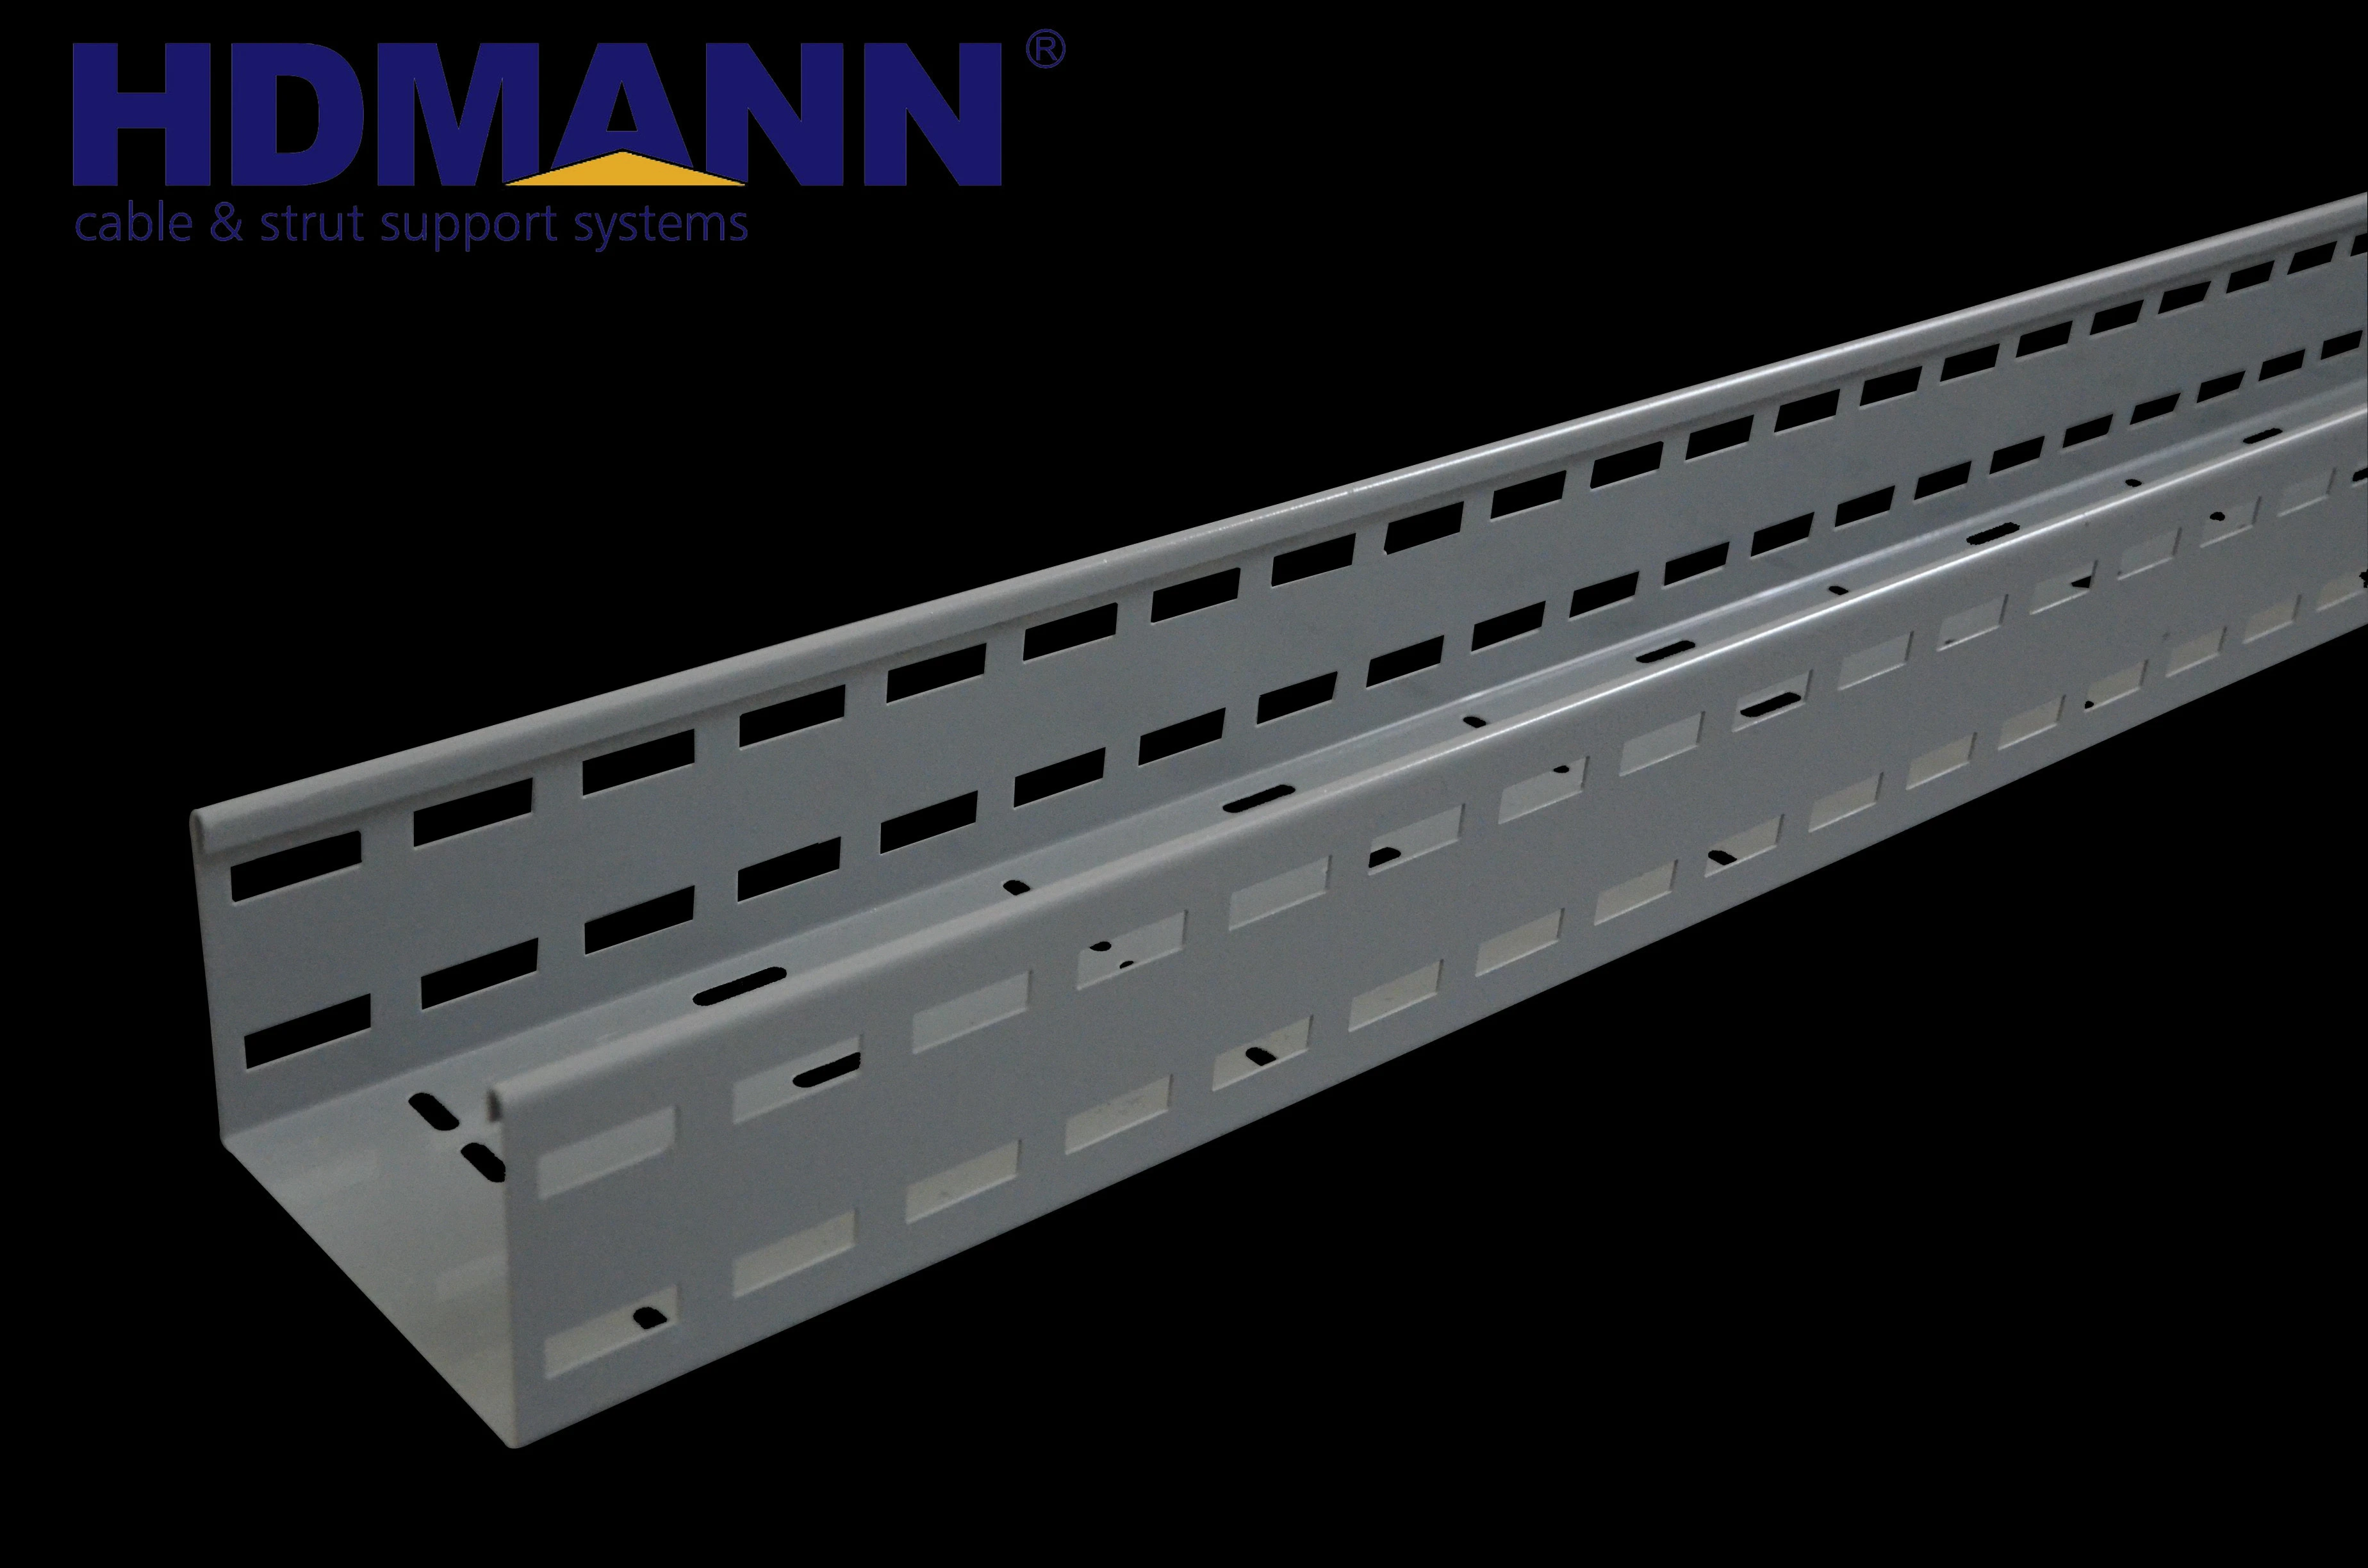 Hdmann High Quality HDG Cable tray Manufacturers